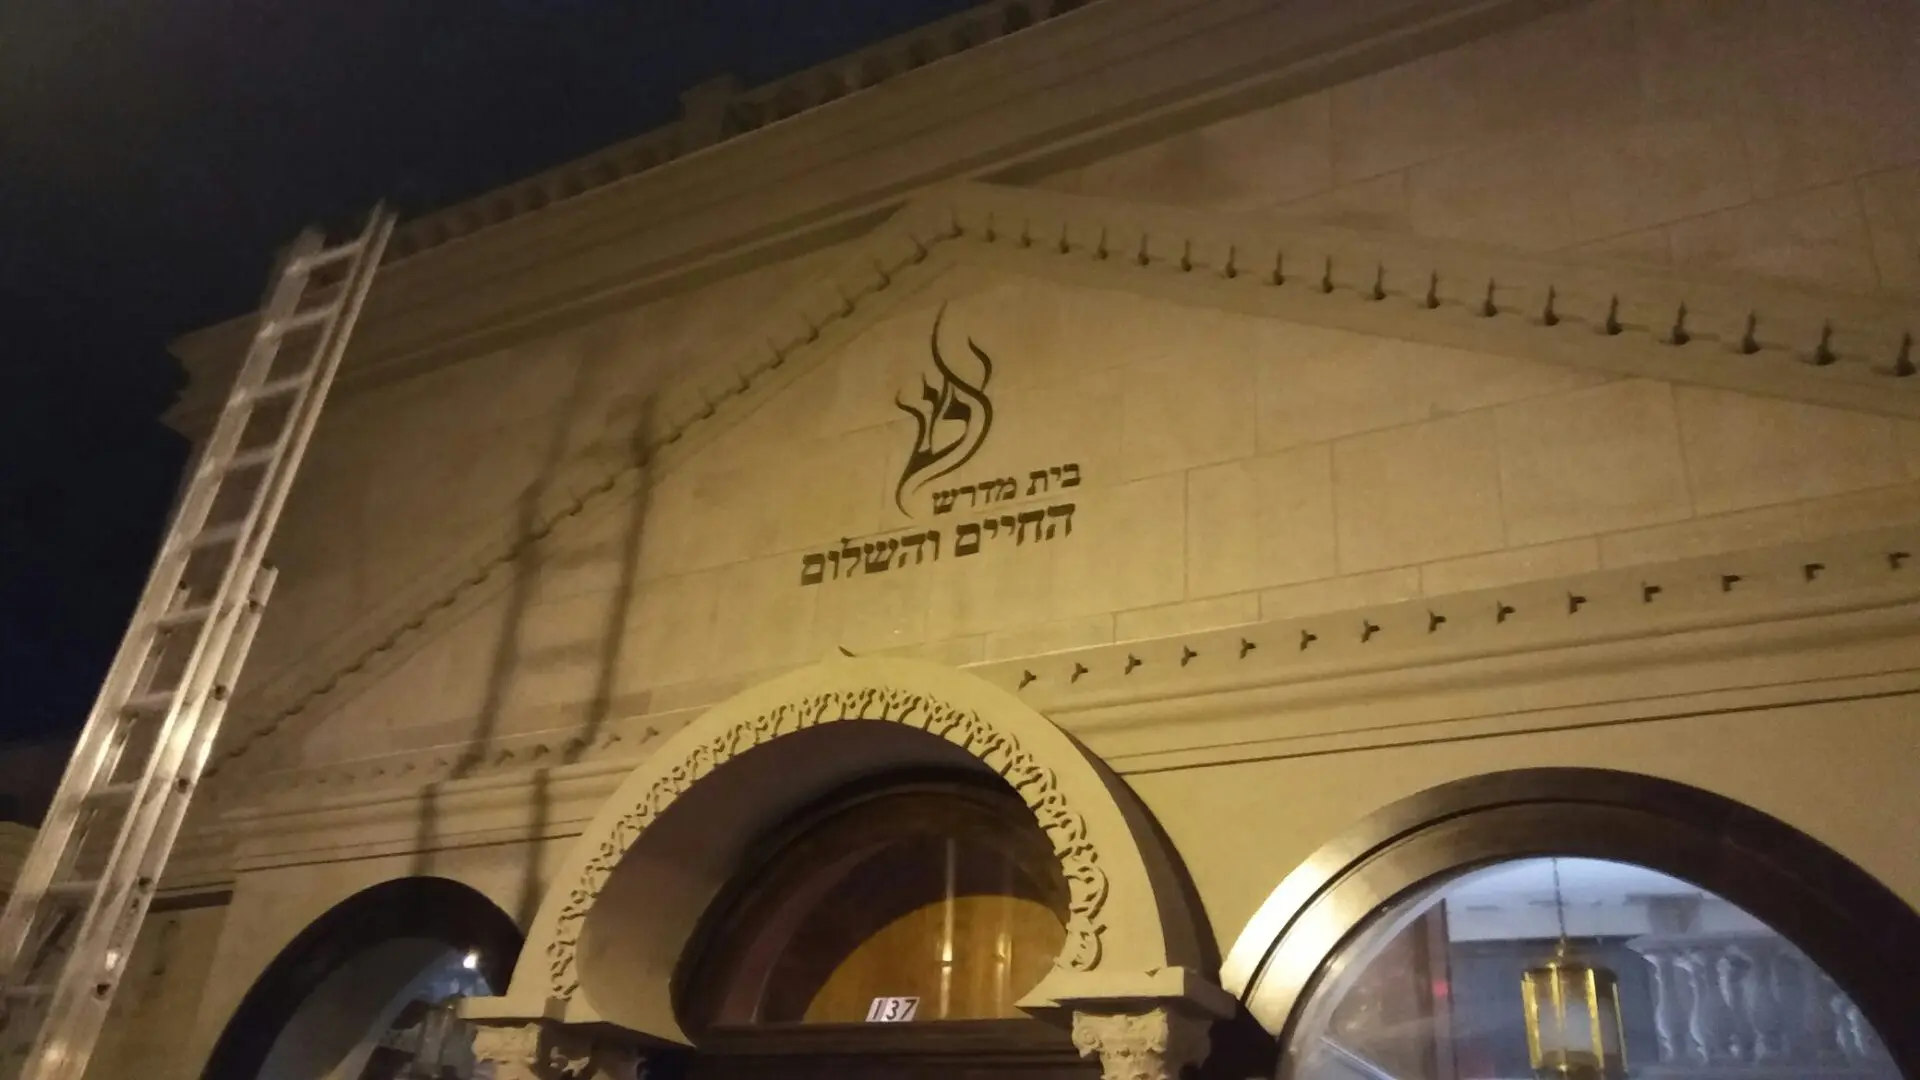 Night view of the ADP USA Solutions Gallery facade with Hebrew text, ornate arches, and a decorative flame symbol, illuminated by soft lighting.